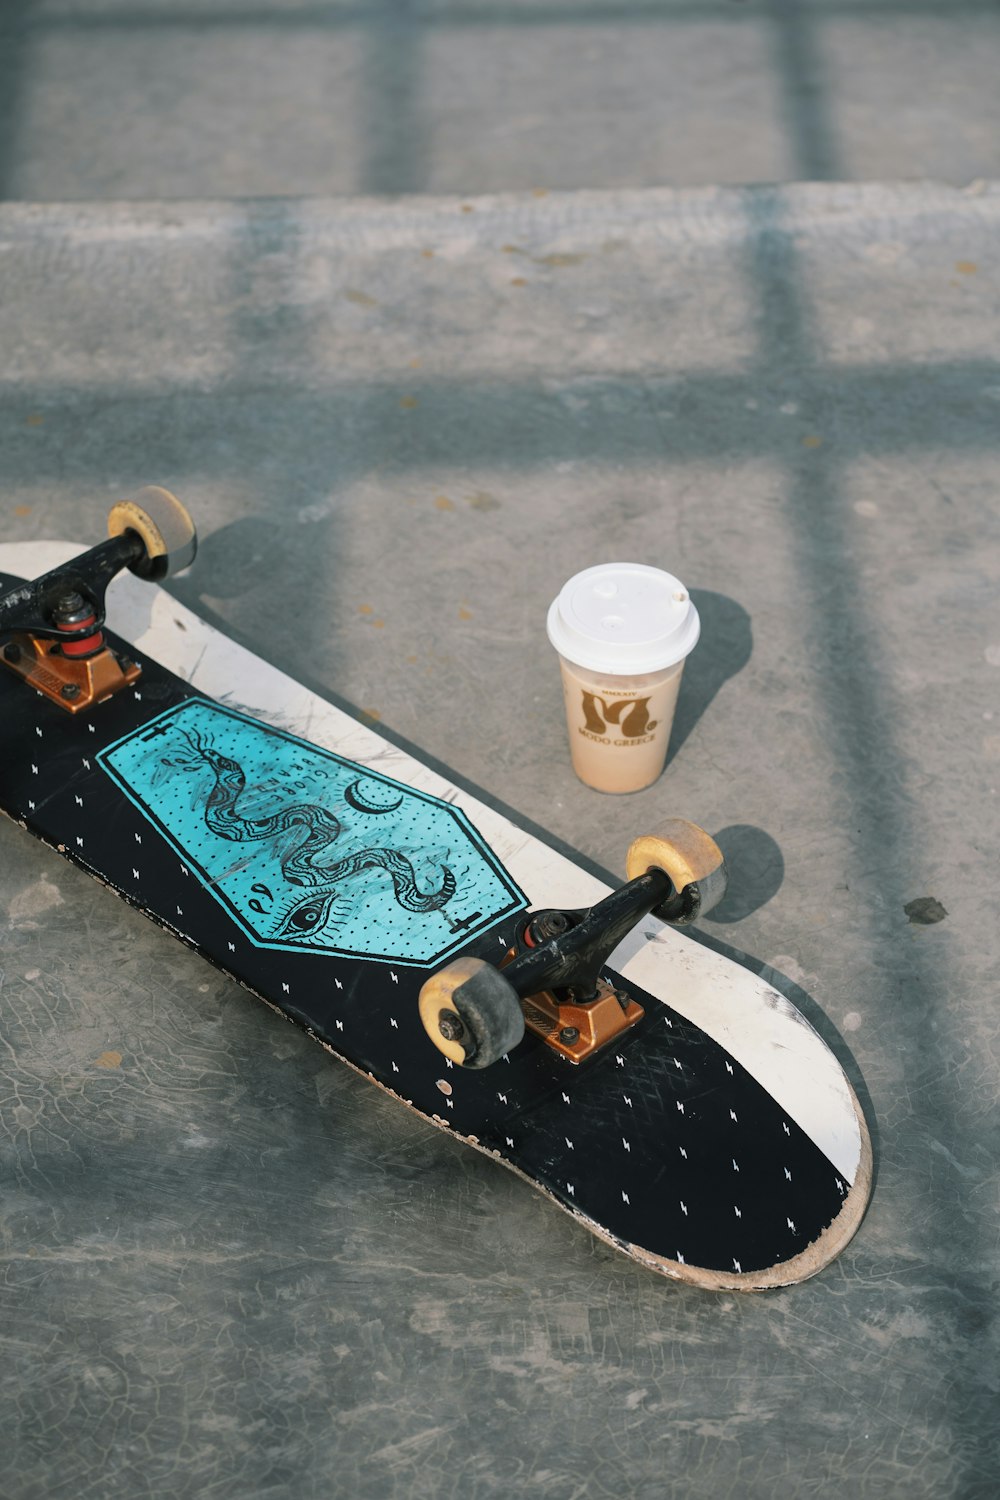 a skateboard and a cup of coffee on the ground